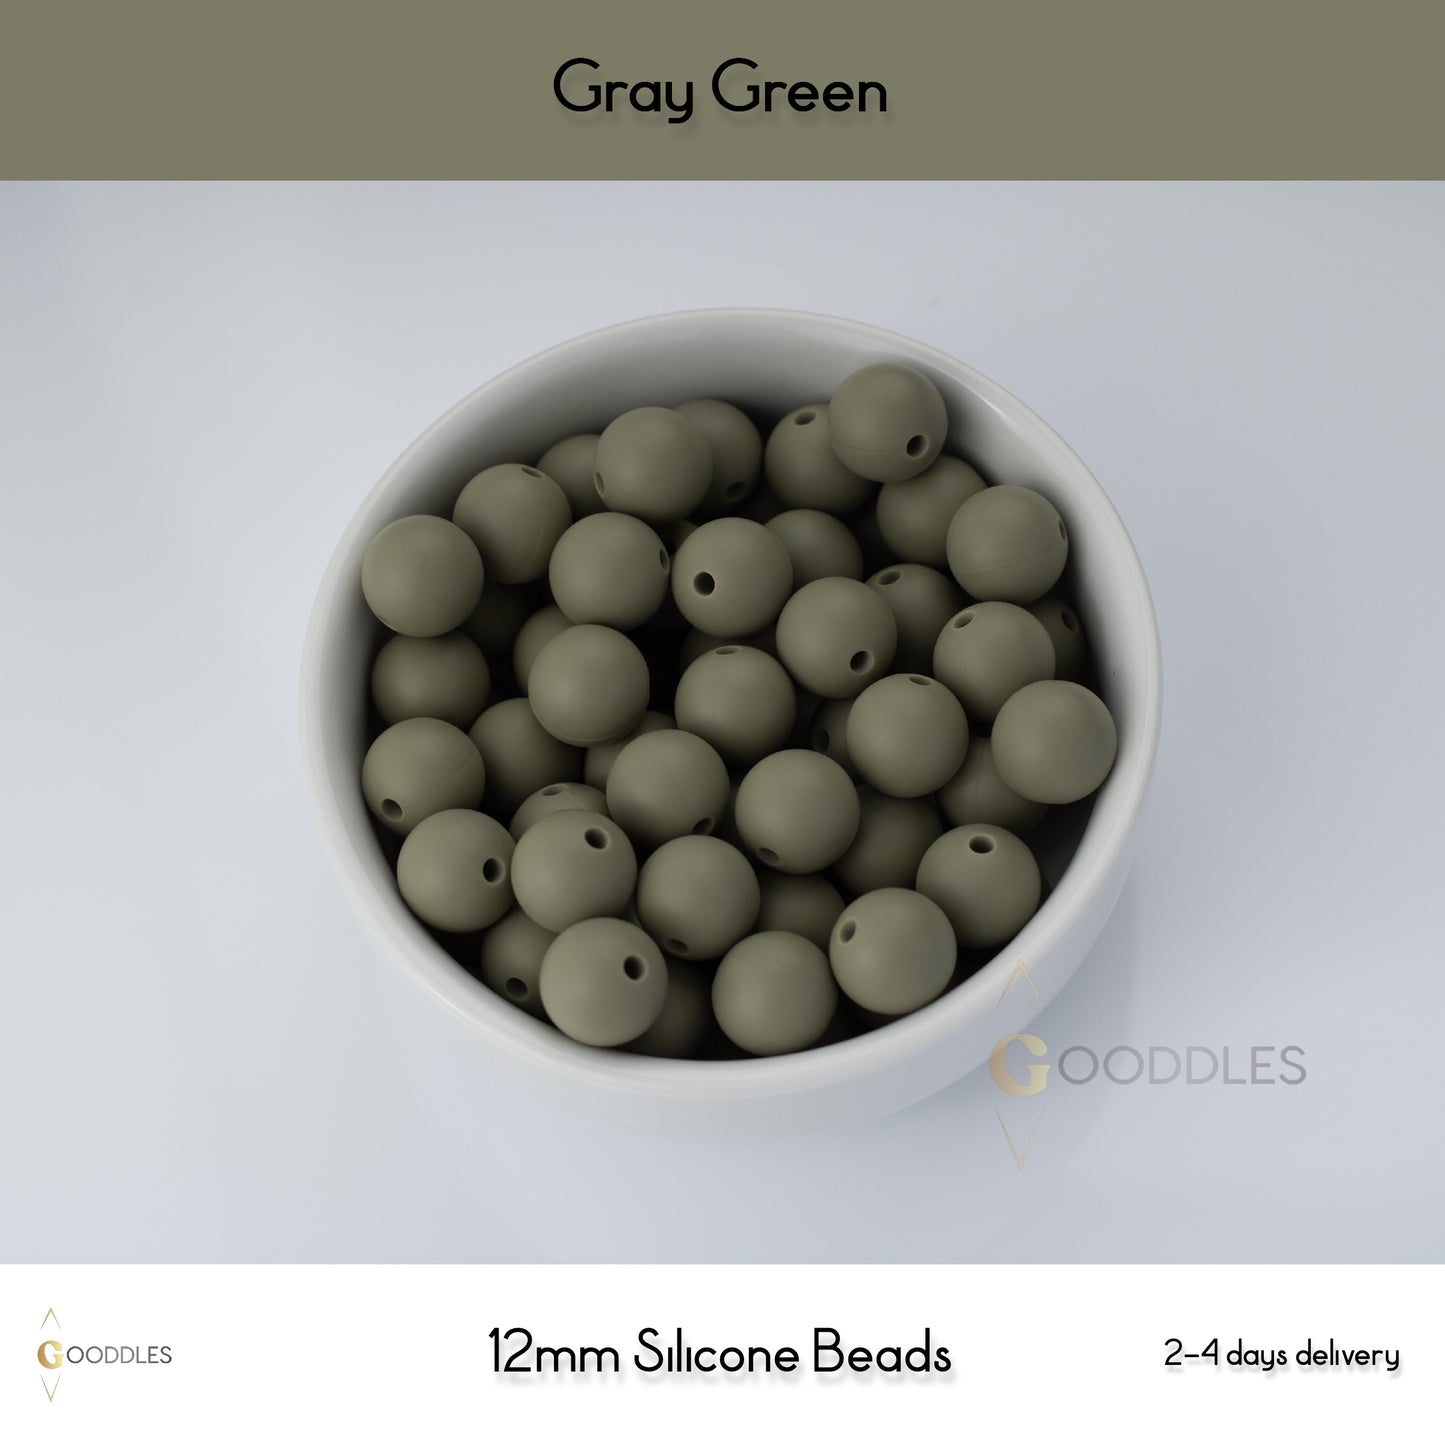 5pcs, Gray Green Silicone Beads Round Silicone Beads